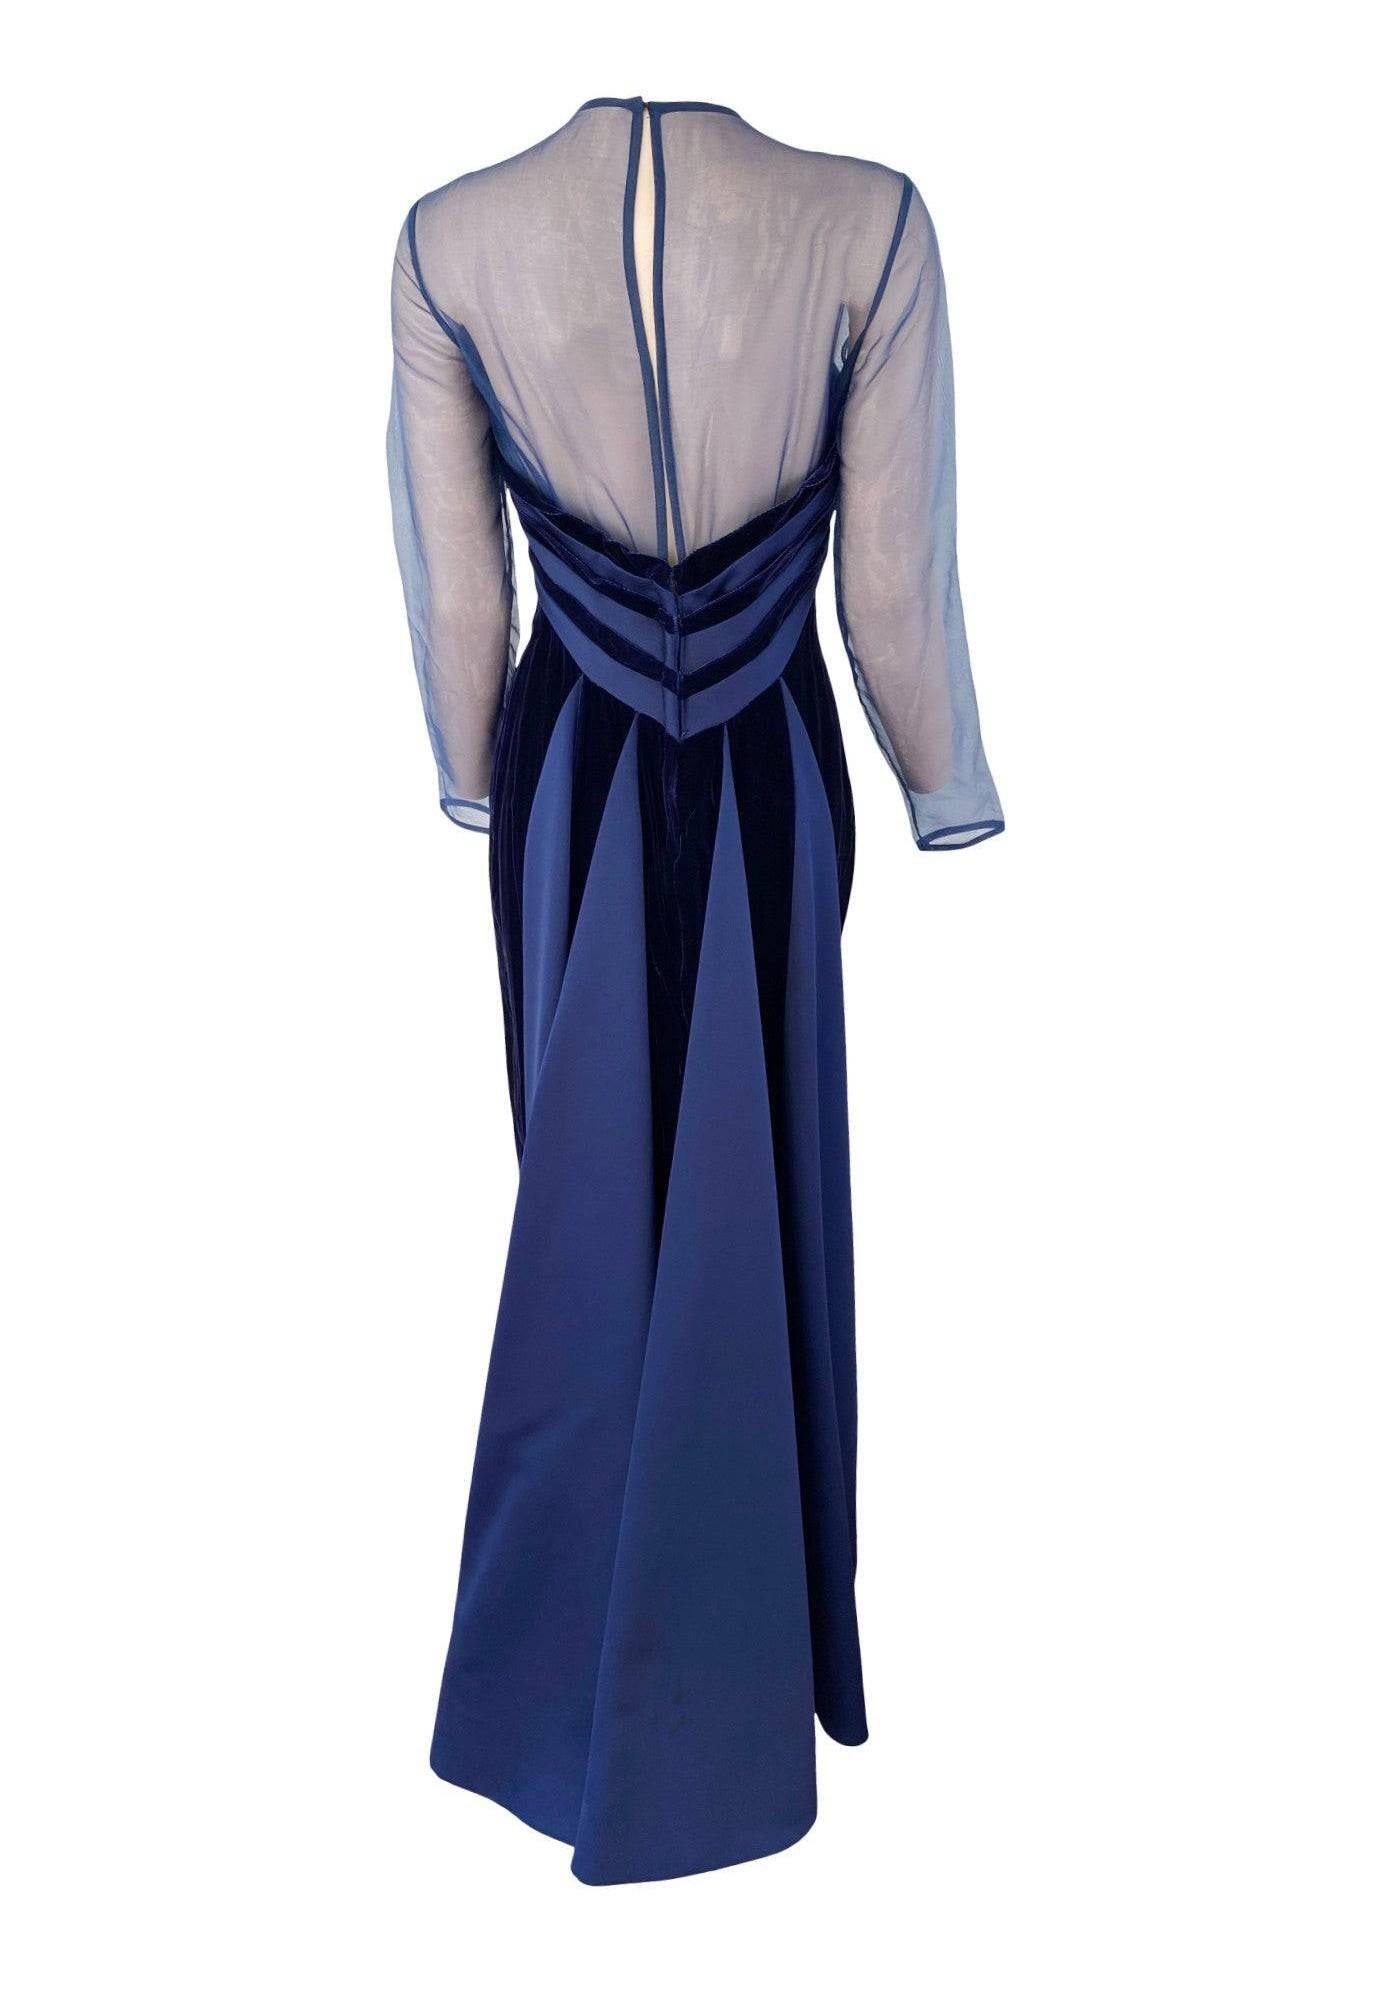 Absolutely stunning Victor Costa vintage evening gown! The dress is a super-soft, deep navy velvet with contrasting-textured navy satin accents. The satin forms inset panels at the back of the skirt, creating a small train effect, as well as